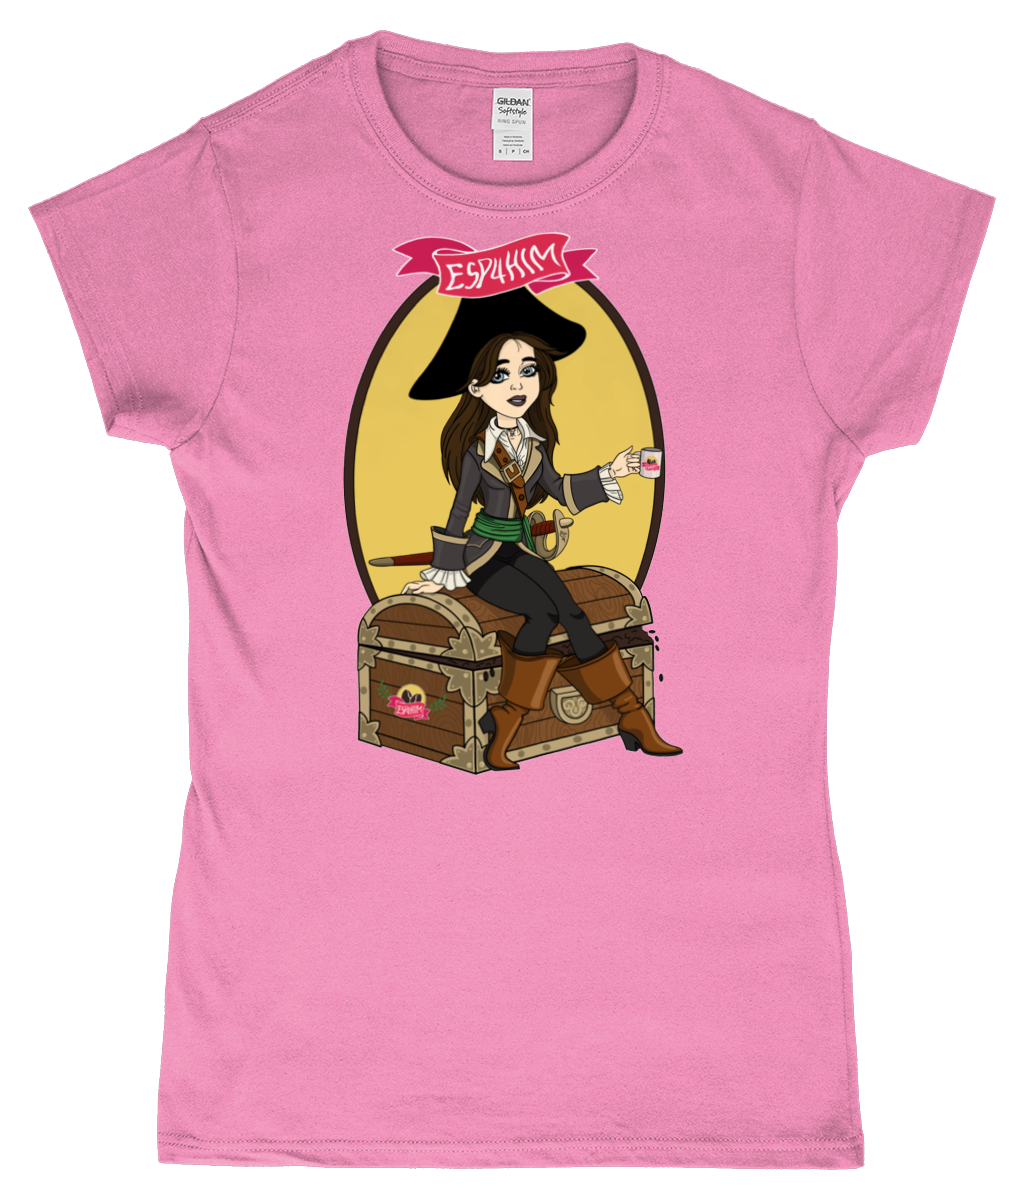 ESP4HIM 'Coffee Hoarding Pirate' Ladies Softstyle Fitted T-Shirt